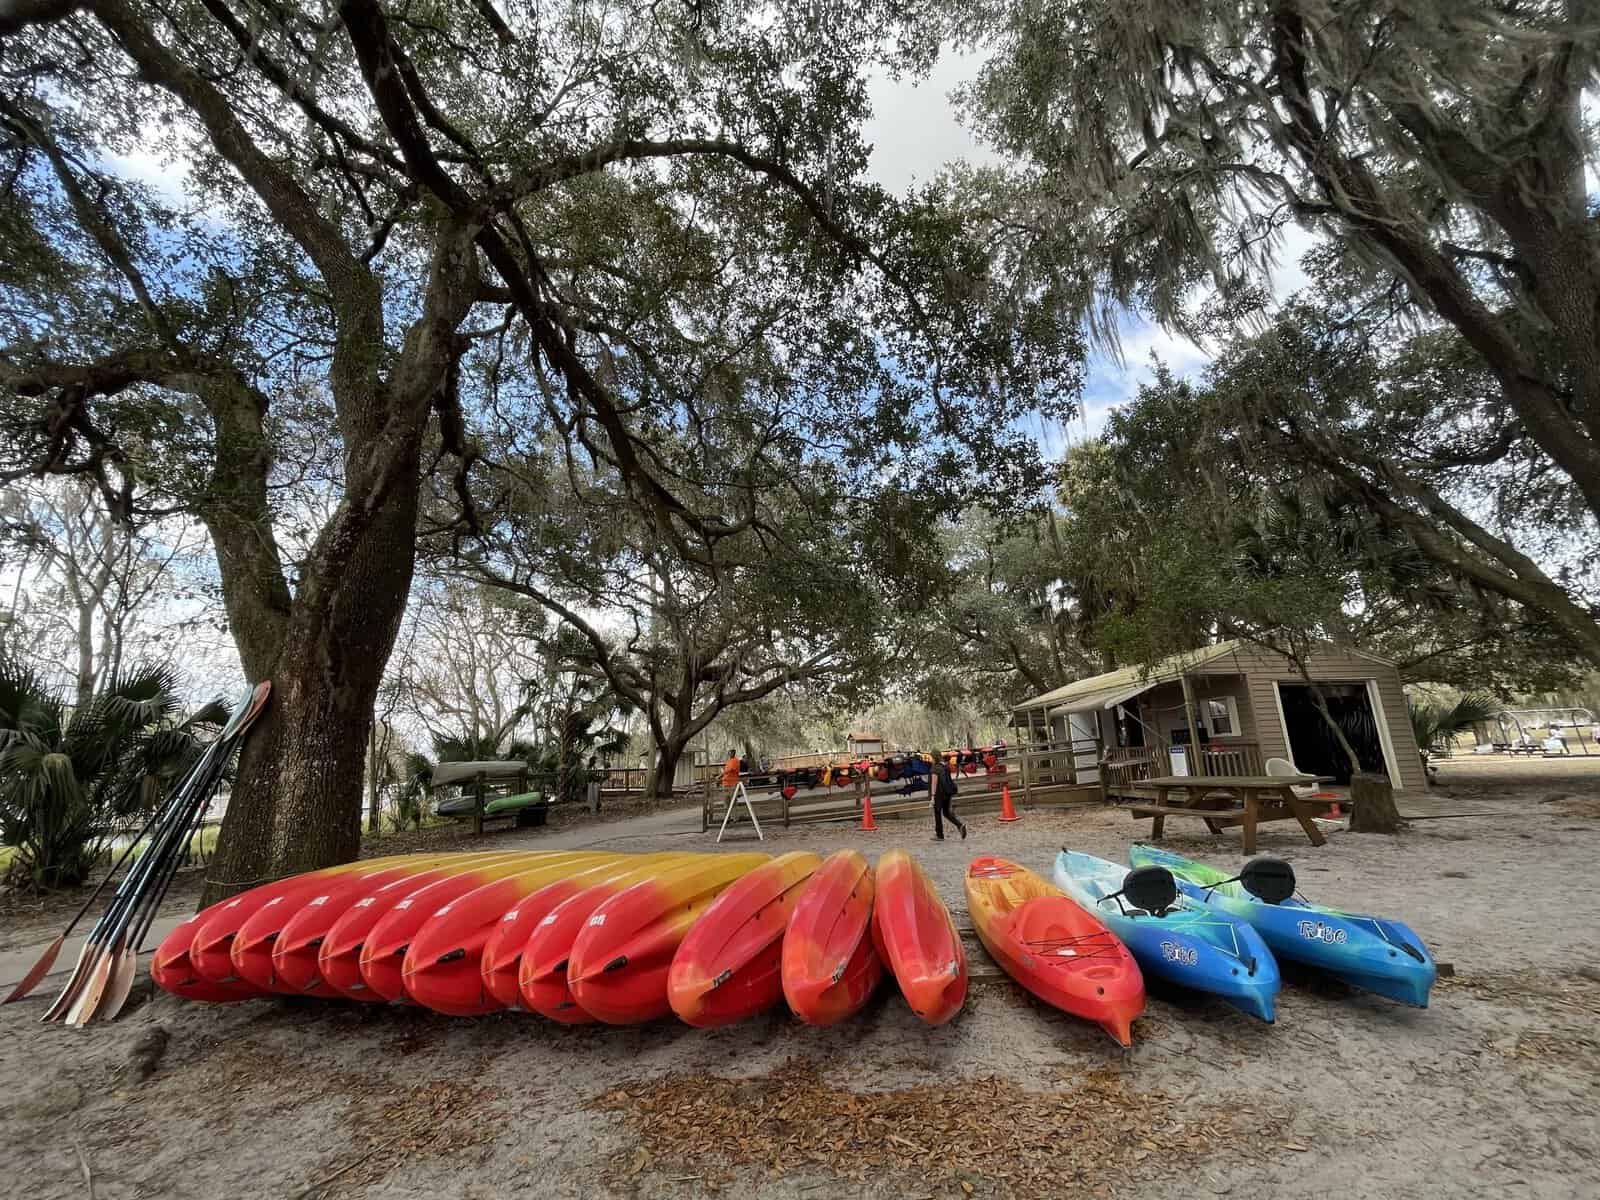 Blue Spring State Park: image of kayaks you can rent to see the manatees swim or explore St. Johns River